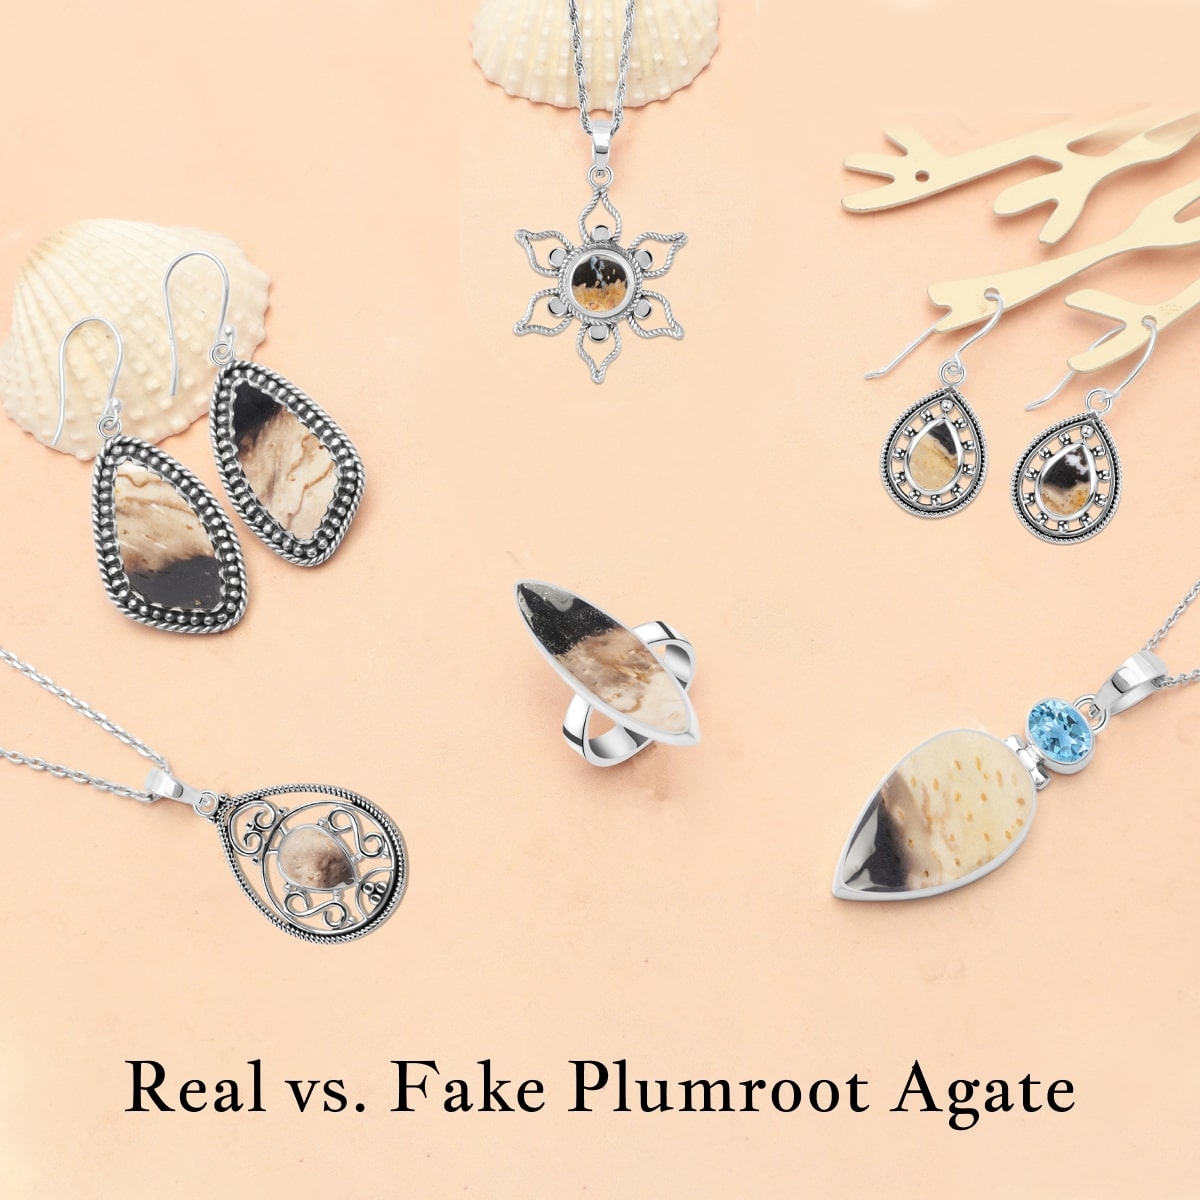 How To Identify Fake Plumroot Agate Stones